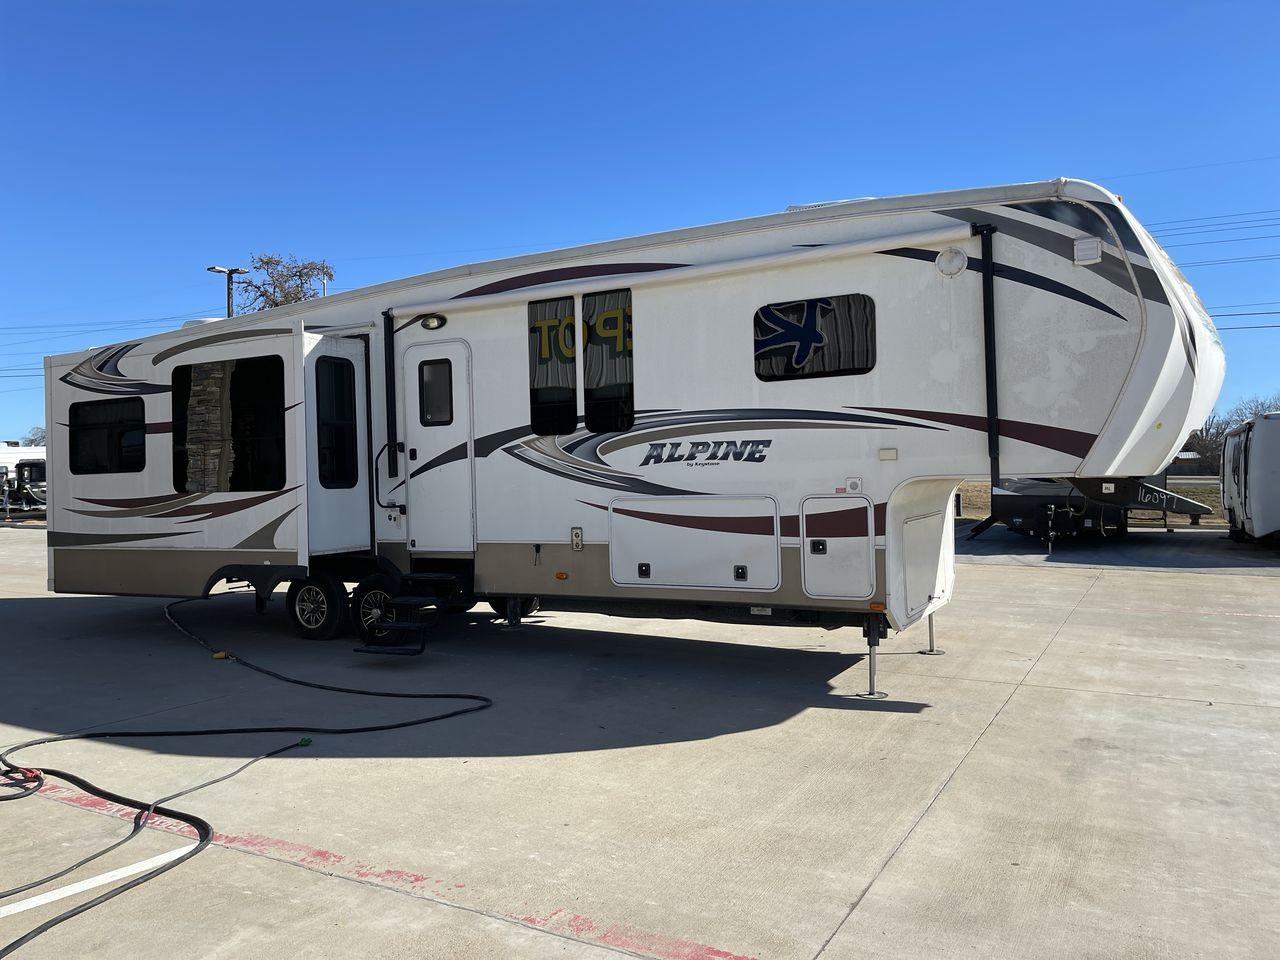 2014 WHITE ALPINE 3500RE - (4YDF35025EE) , Length: 39.17 ft. | Dry Weight: 12,379 lbs. | Gross Weight: 15,500 lbs. | Slides: 4 transmission, located at 4319 N Main Street, Cleburne, TX, 76033, (817) 221-0660, 32.435829, -97.384178 - The 2014 Alpine 3500RE fifth wheel combines style and utility. For individuals looking for a luxurious home on wheels, this RV's amenities are precisely crafted and comfort-oriented. The dimensions of this unit are 39.17 ft in length, 8 ft in width, and 12.67 ft in height. It has a dry weight of 12, - Photo #23